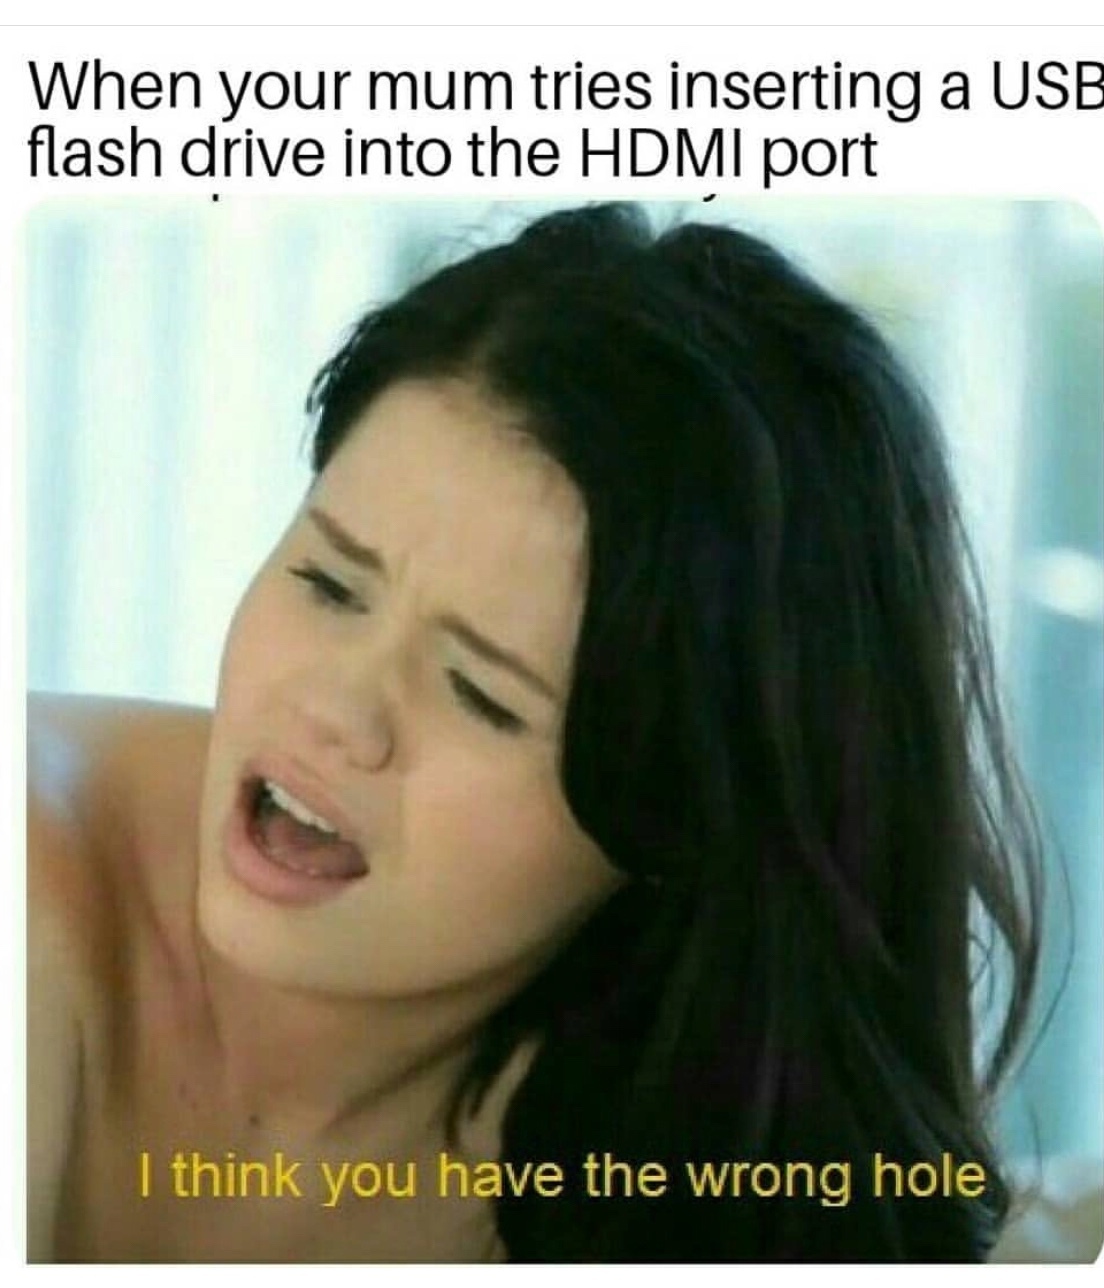 it’s always the right hole - meme